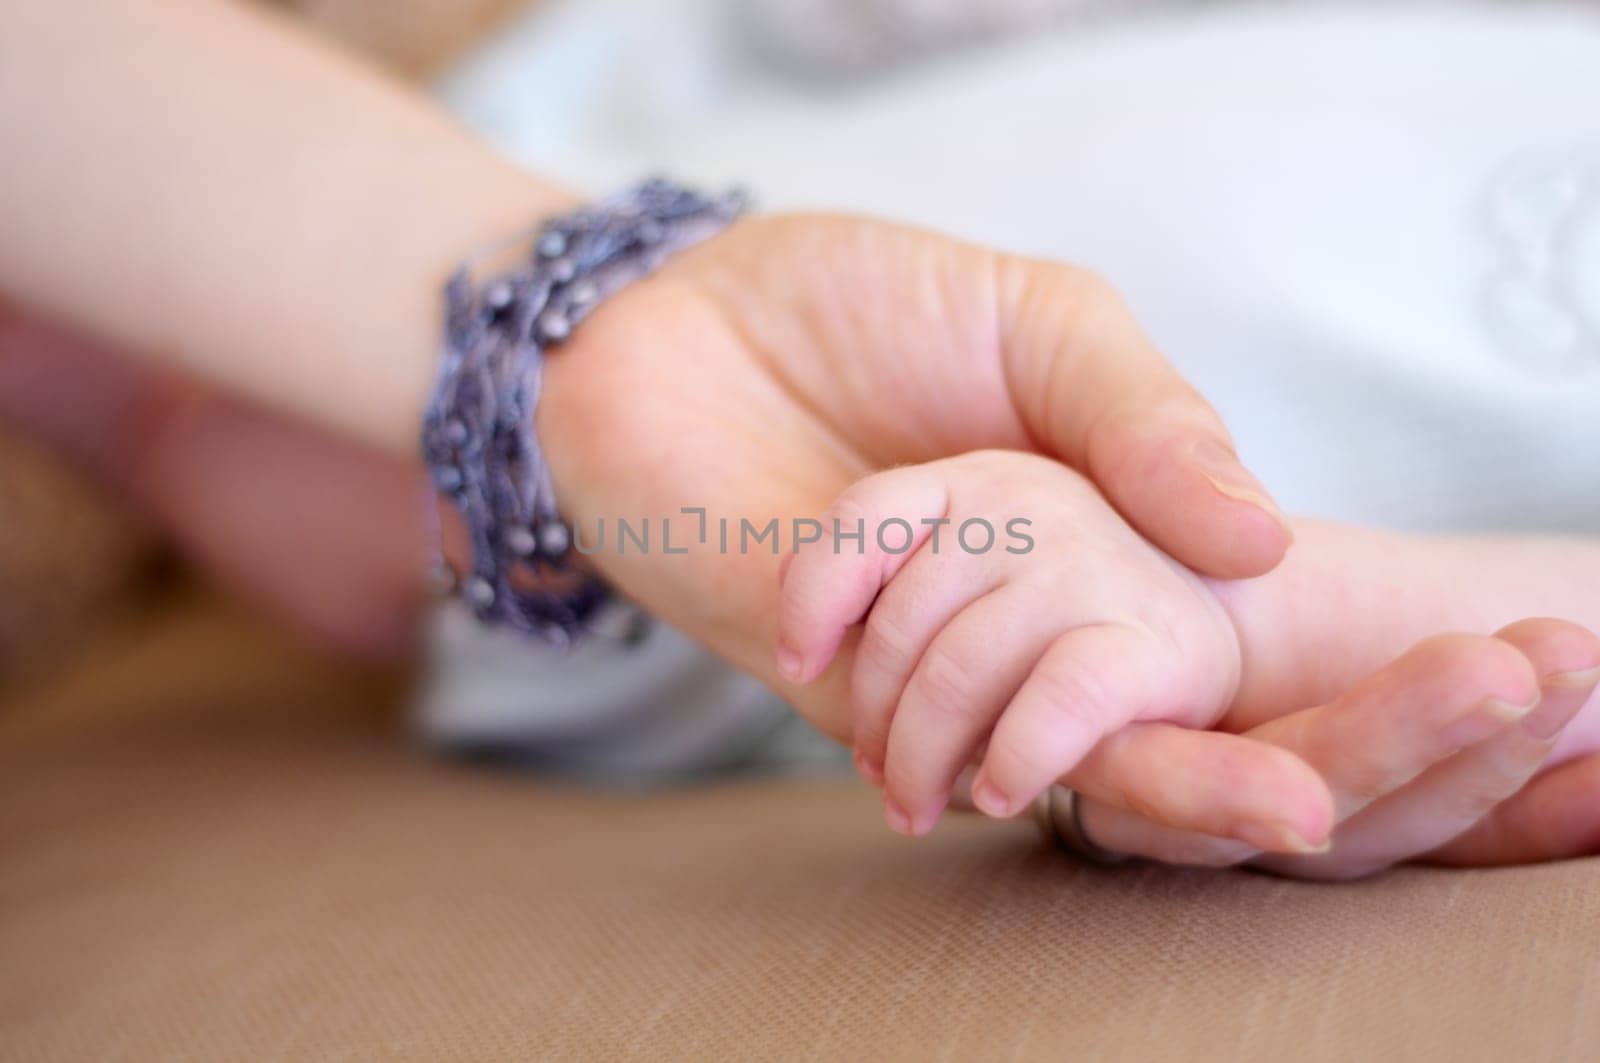 Love, family and mother holding hands with her baby in the home for trust, care or bonding together closeup. Children, hand or comfort with a mama and newborn infant in a house to nurture growth.